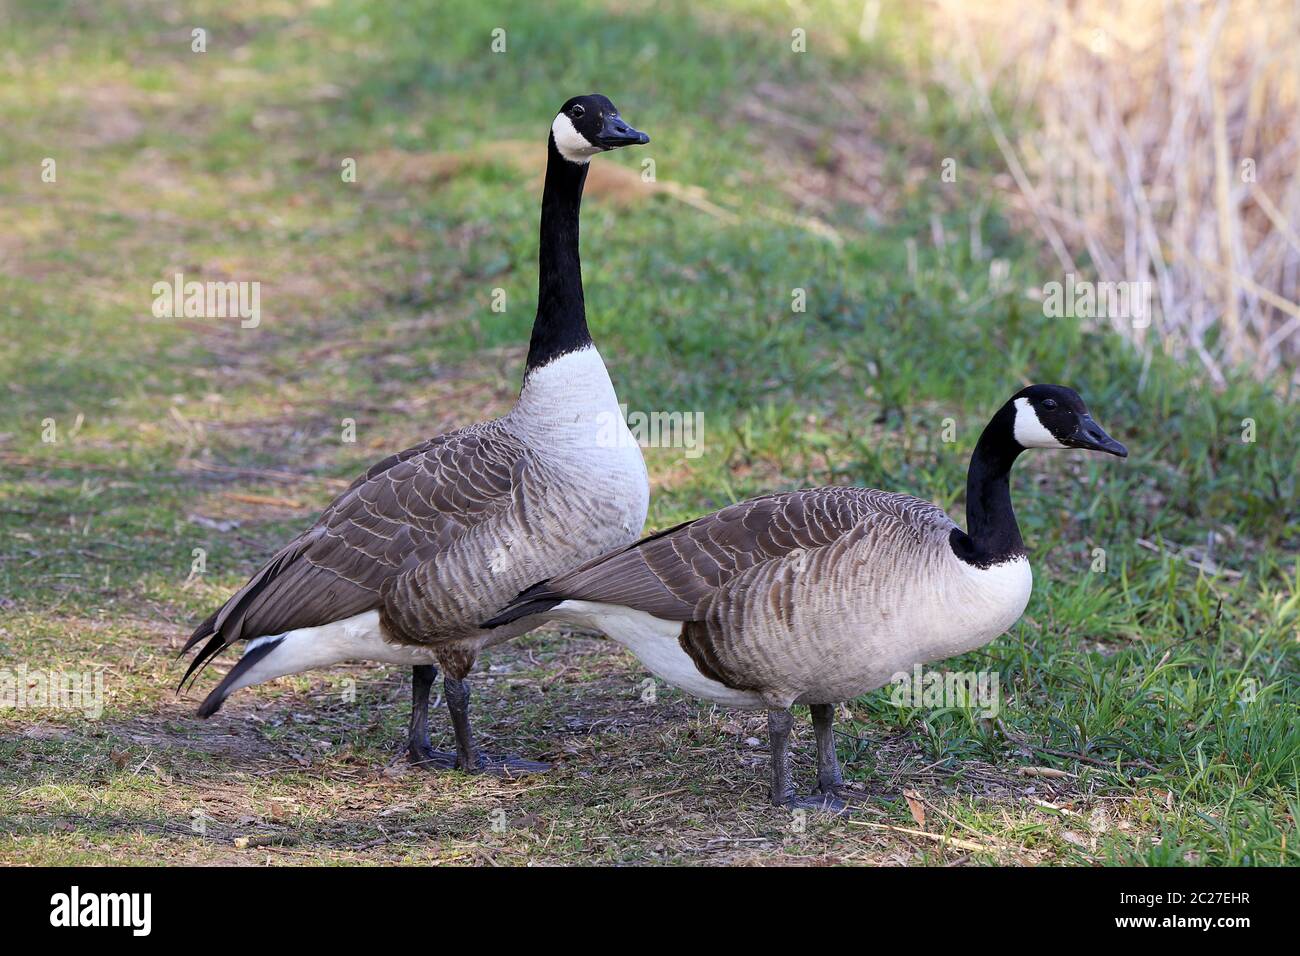 Canada-tails Branta canadensis in Wagbachniden nature reserve Stock Photo